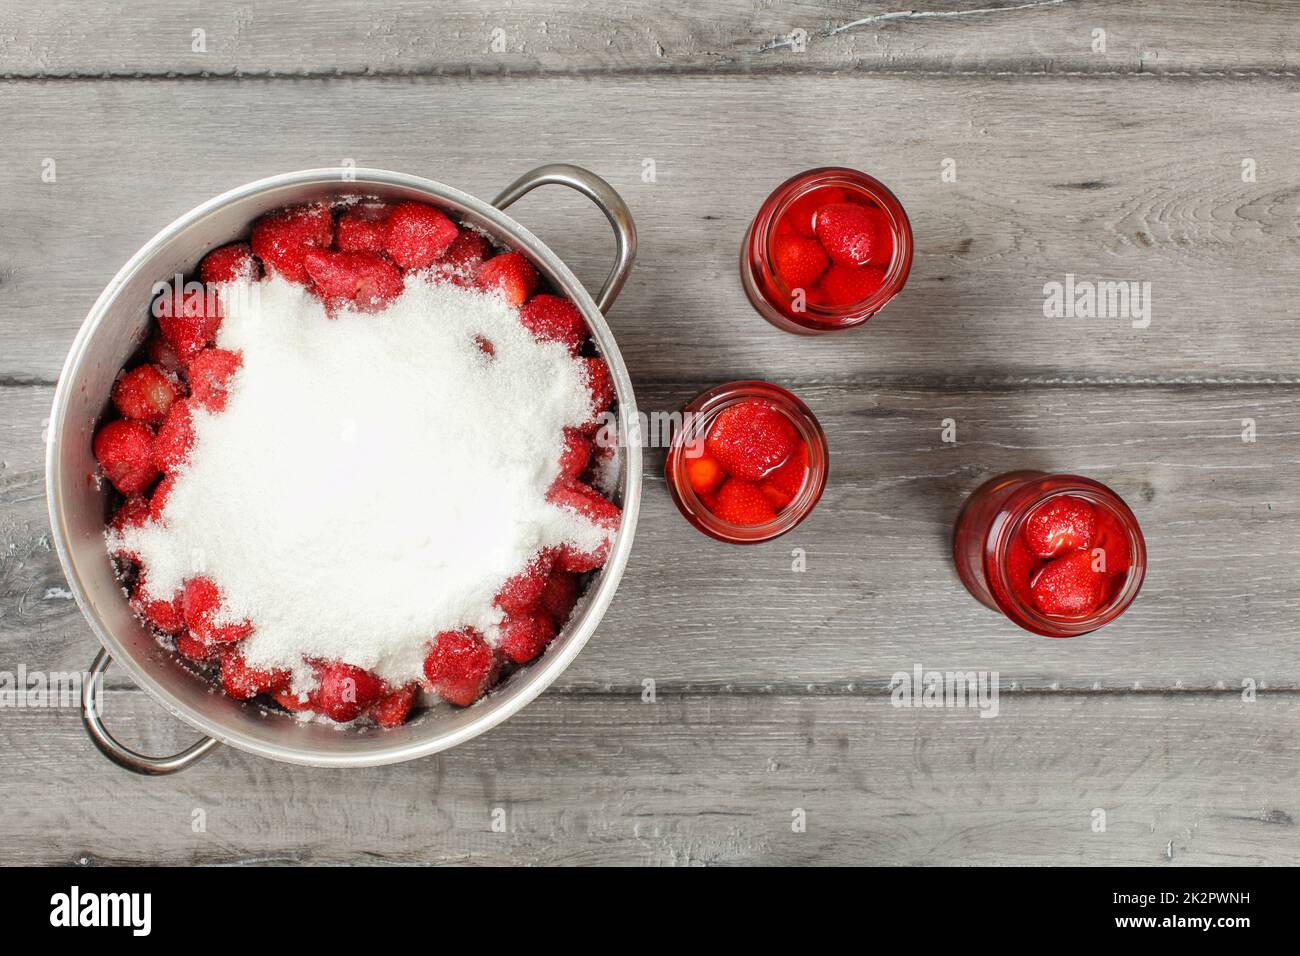 Tabletop view, large steel pot full of strawberries covered with crystal sugar, three bottles of strawberry in syrup next to it on gray wood desk. Homemade compote preparation. Stock Photo